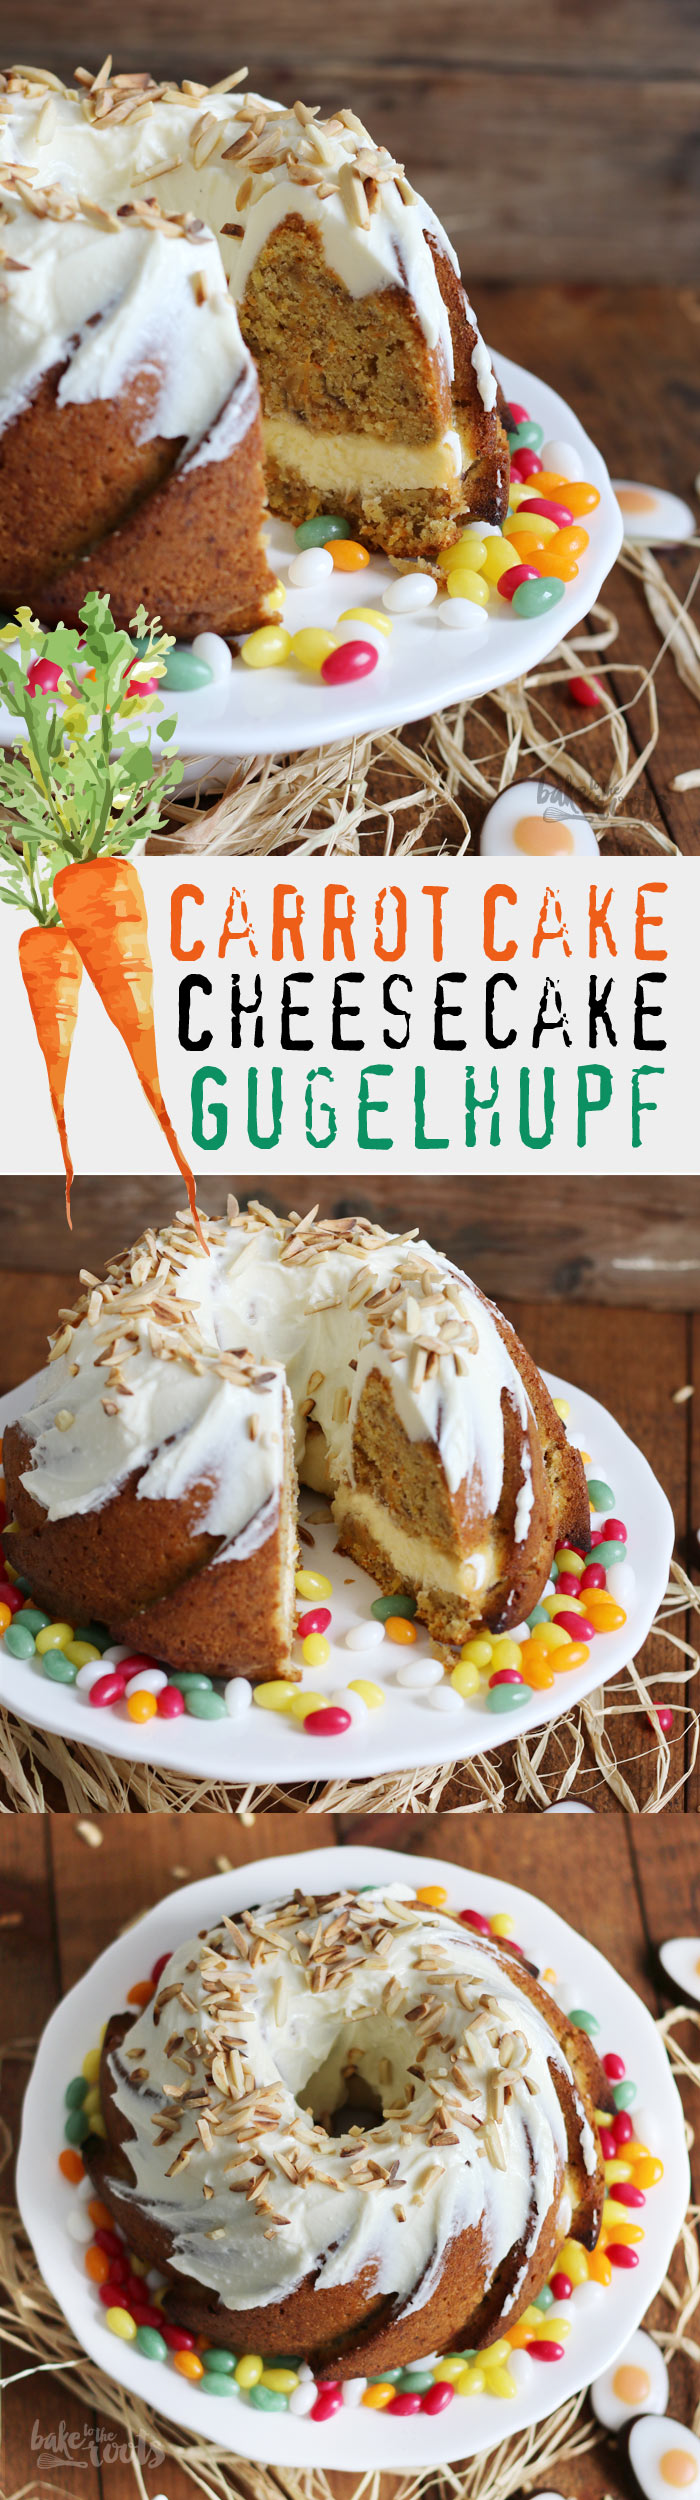 Delicious Carrot Cake Cheesecake Gugelhupf - Perfect for Easter | Bake to the roots